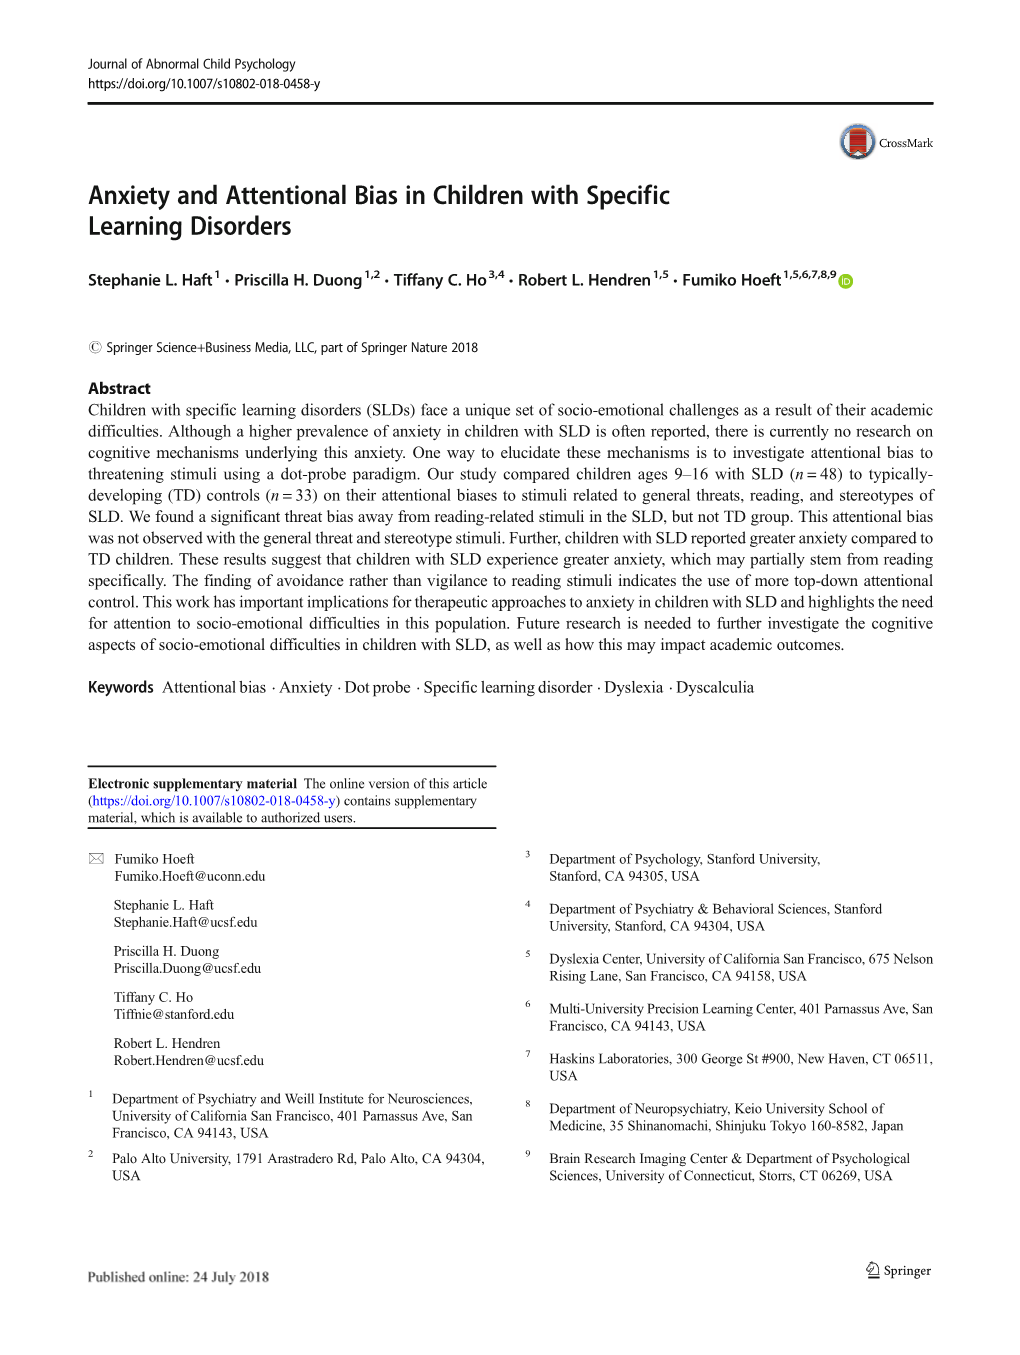 Anxiety and Attentional Bias in Children with Specific Learning Disorders